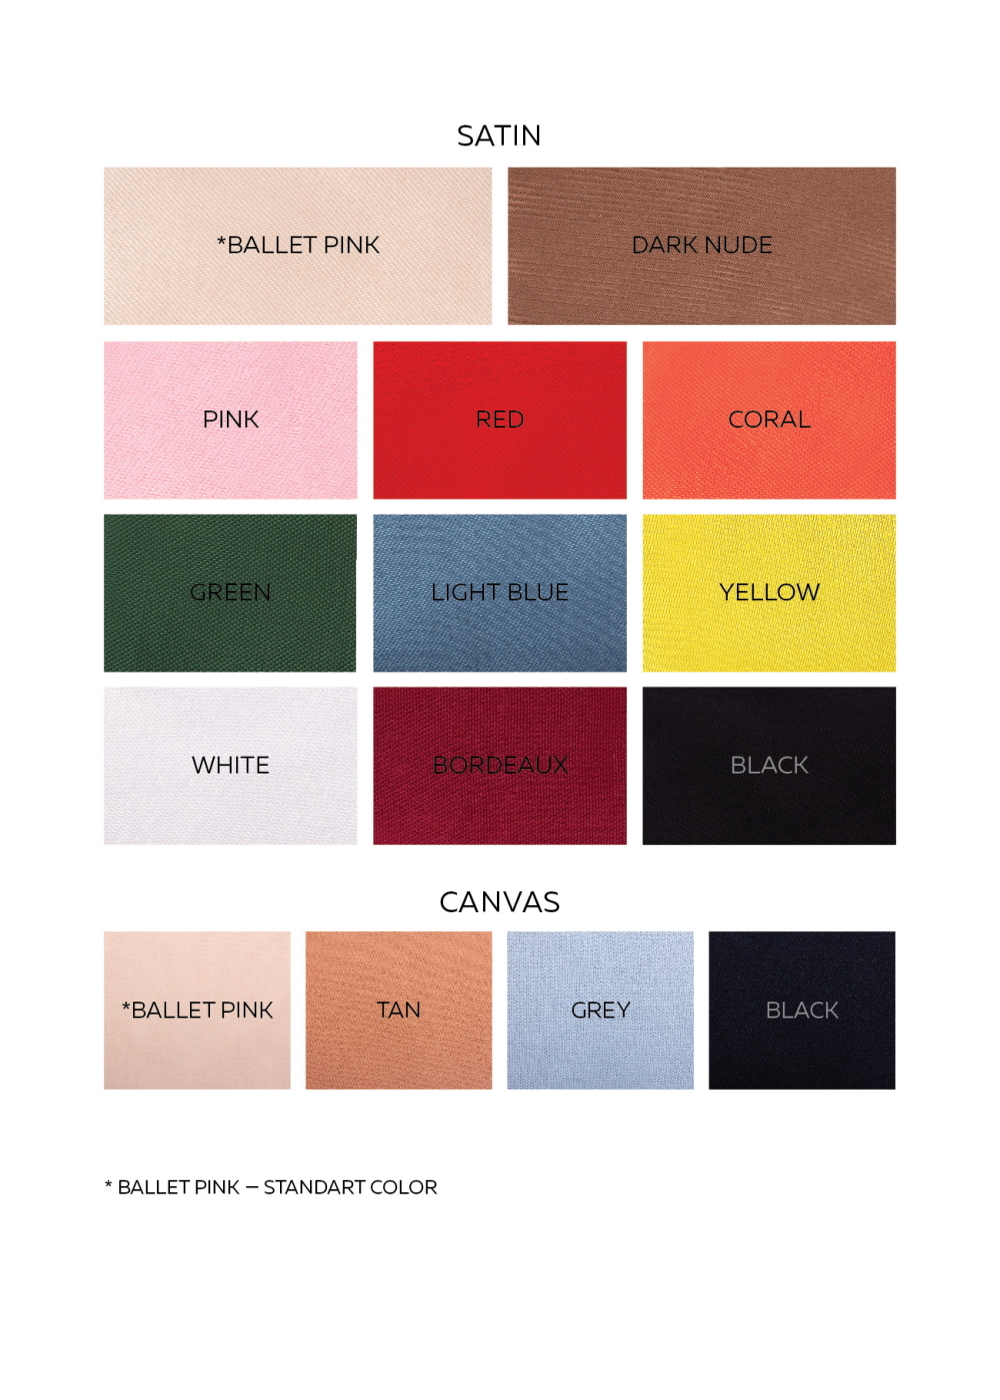 A deep dive into the color pink